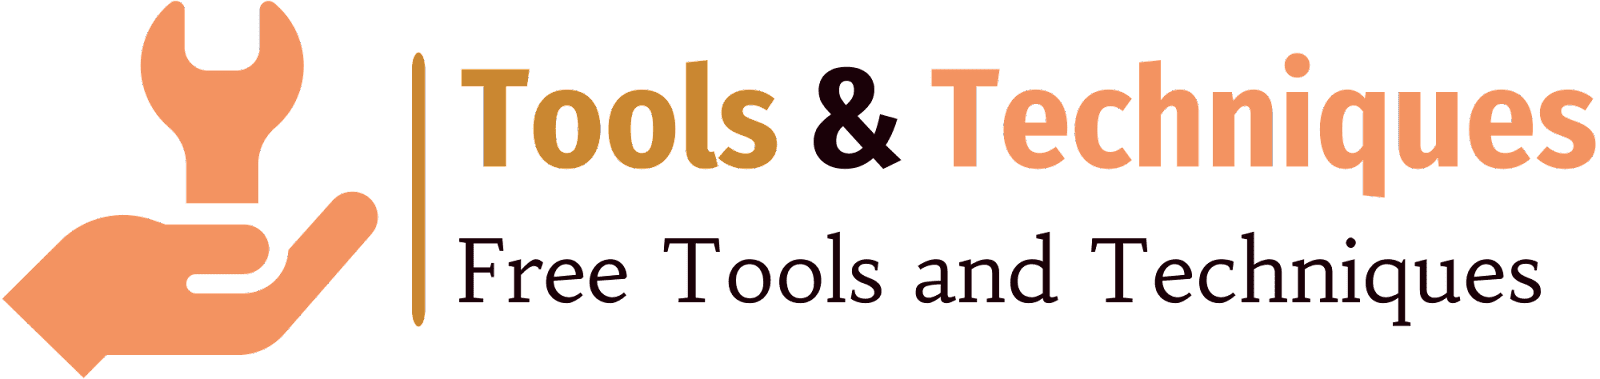 Free Tools and Techniques